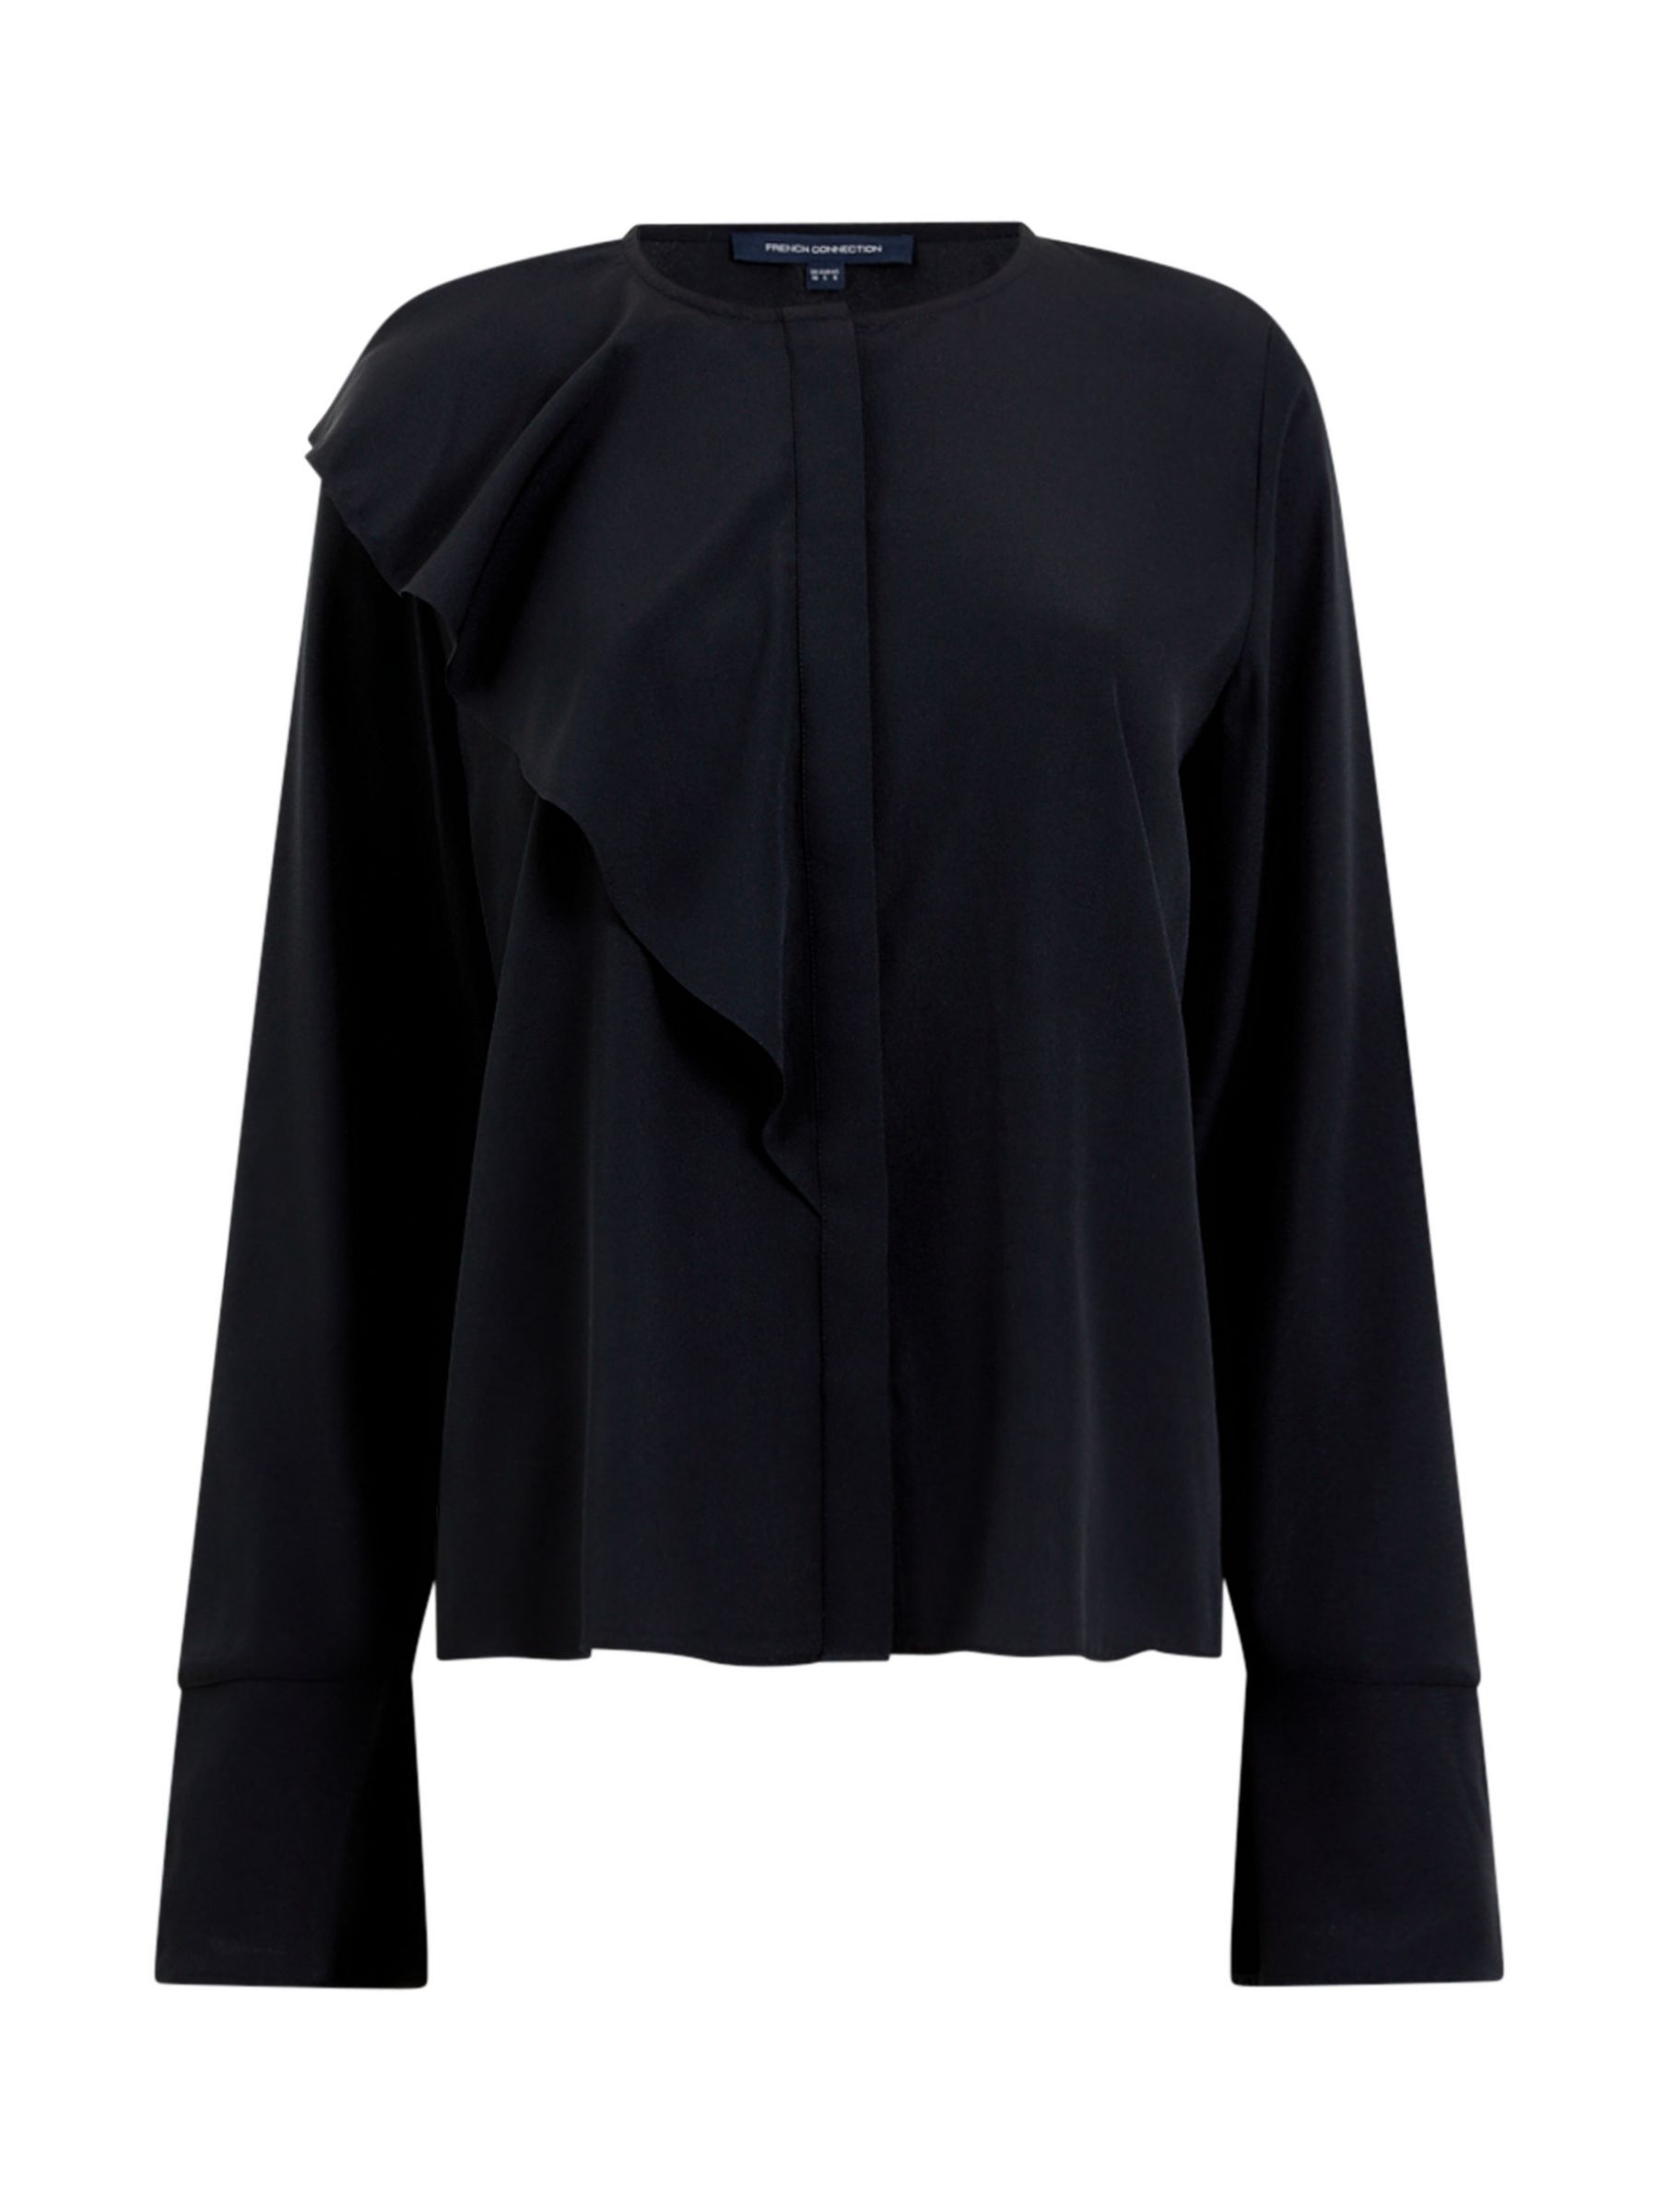 French Connection Crepe Shirt, Blackout at John Lewis & Partners